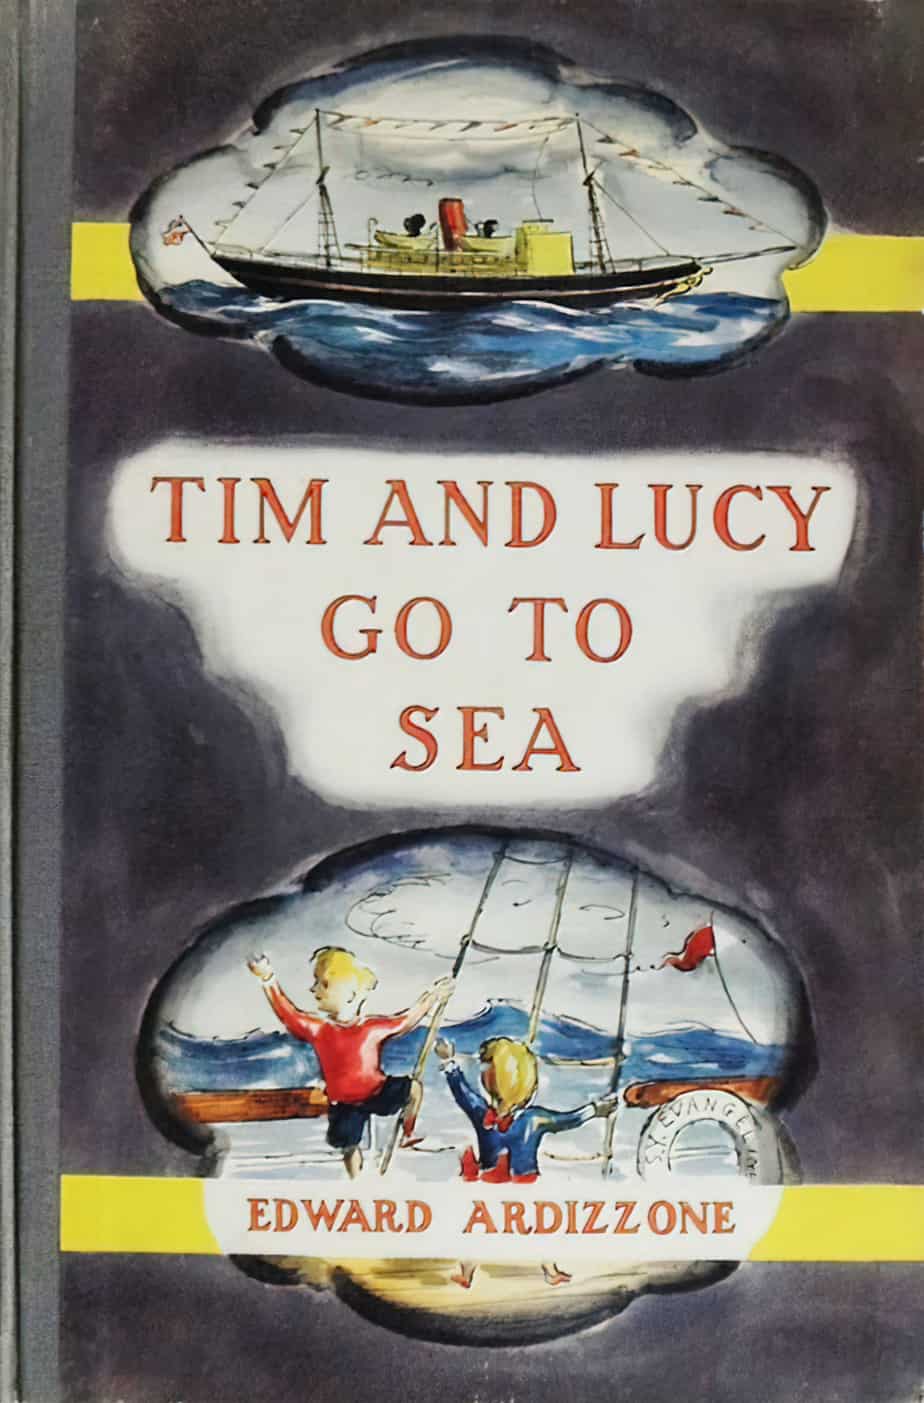 TIM AND LUCY GO TO SEA illustrated by Edward Ardizzone